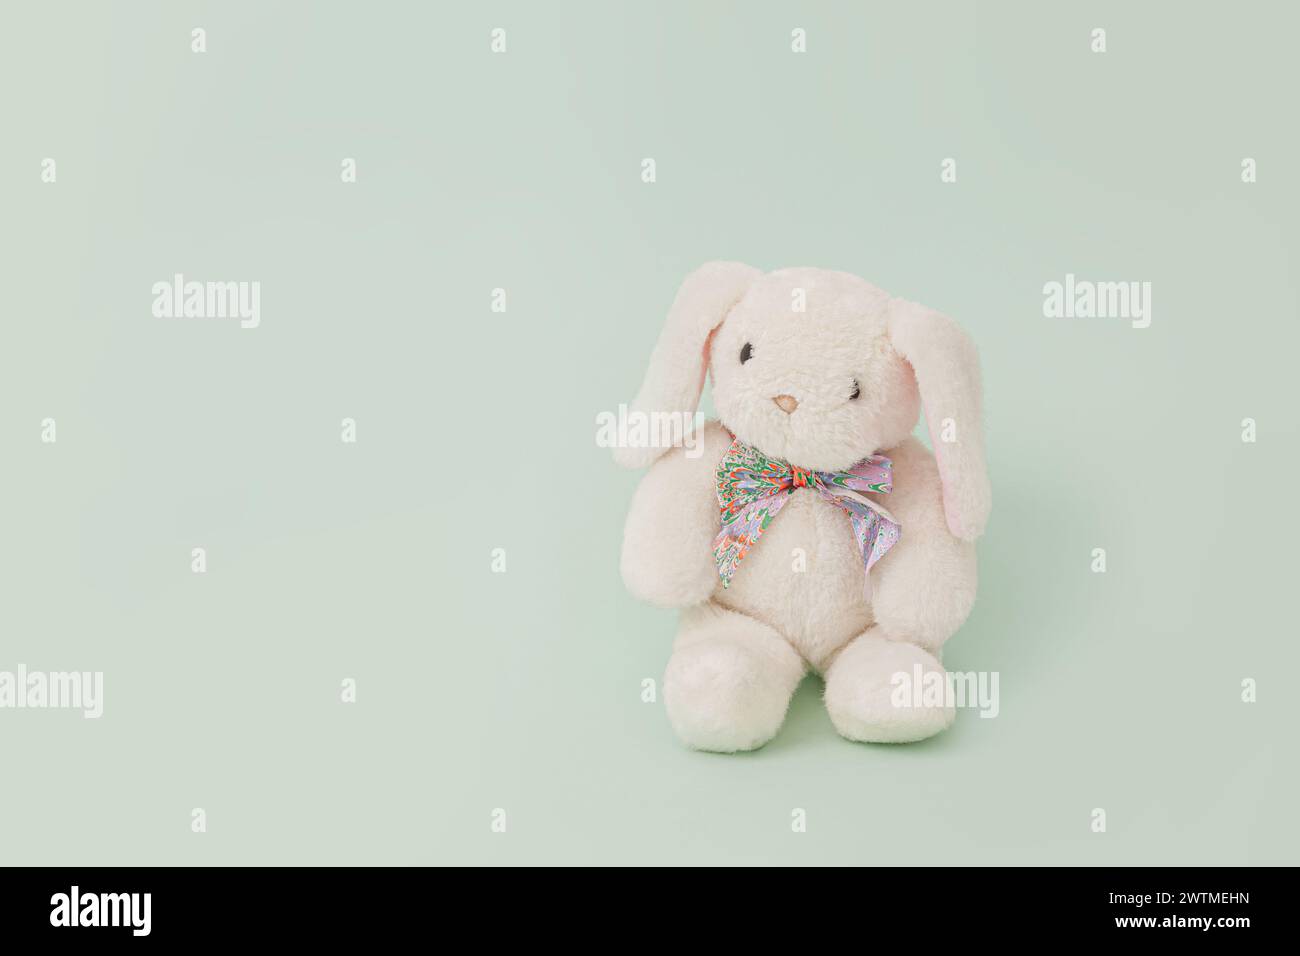 White plush toy rabbit isolated on pale green background; bunny front view Stock Photo